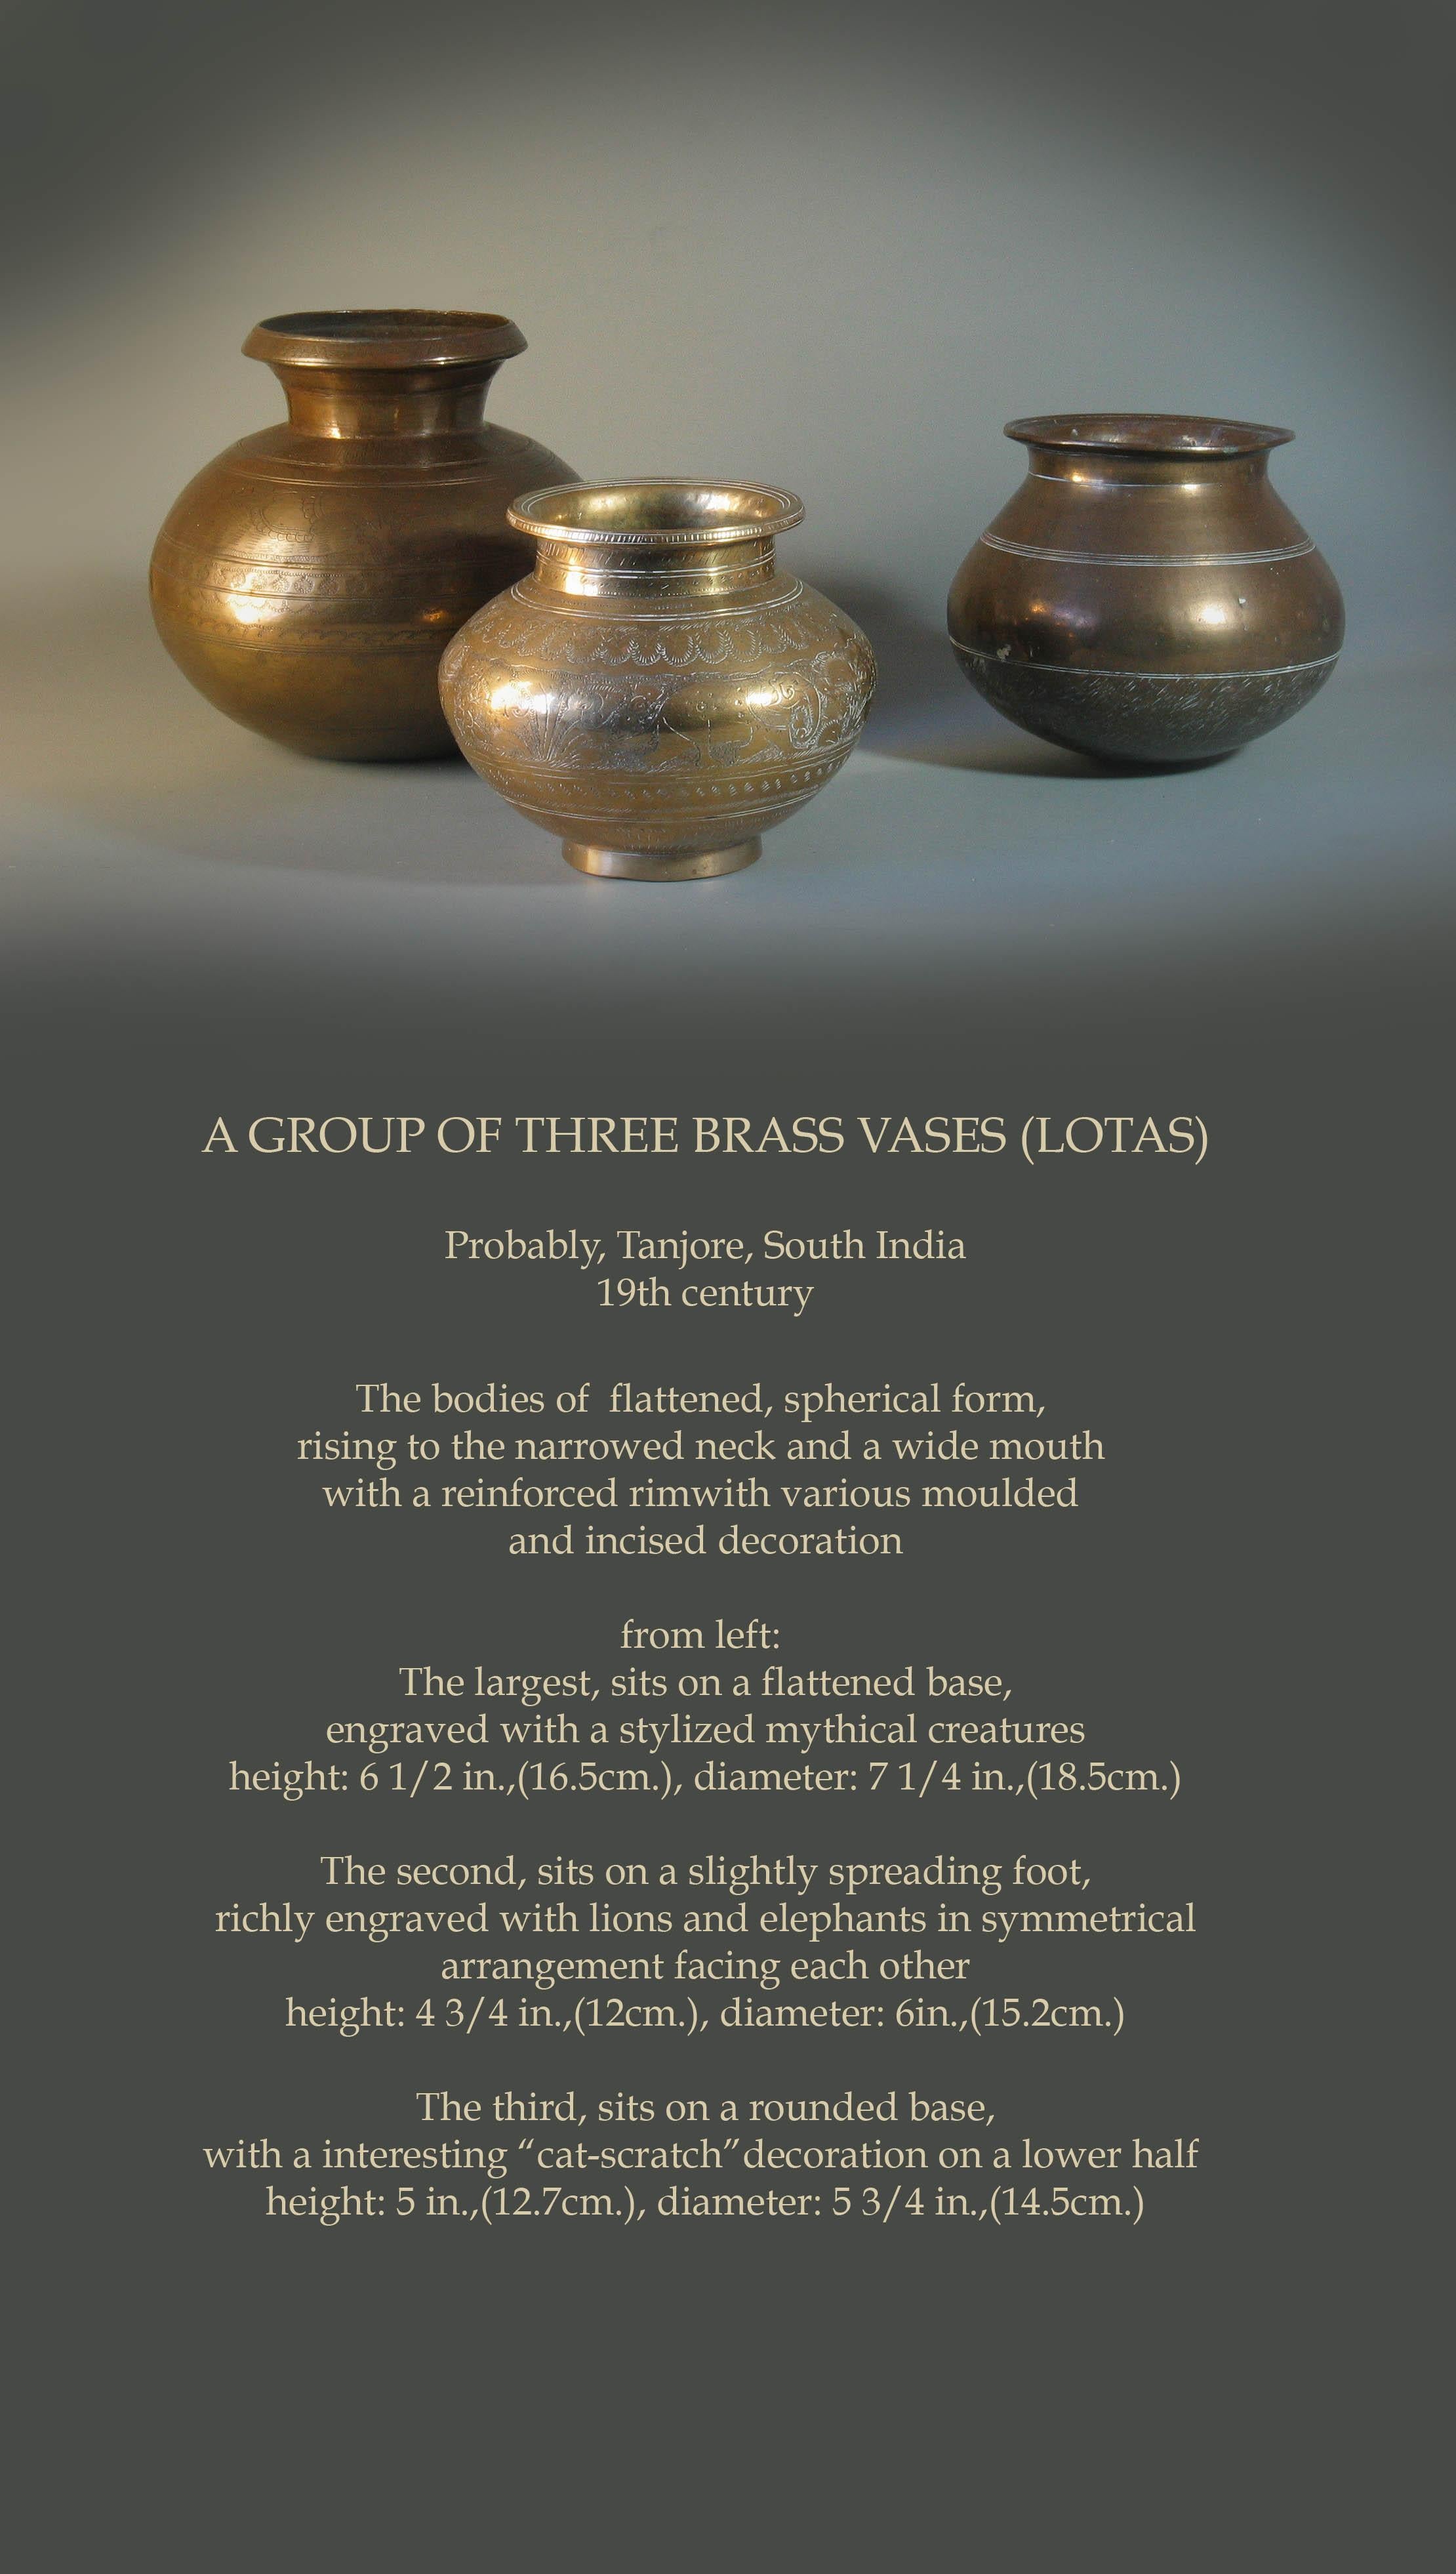 Group of three brass vases

Probably, Tanjore, South India
19th century

The bodies of flattened, spherical form, 
rising to the narrowed neck and a wide mouth 
with a reinforced rimwith various moulded 
and incised decoration

from left: